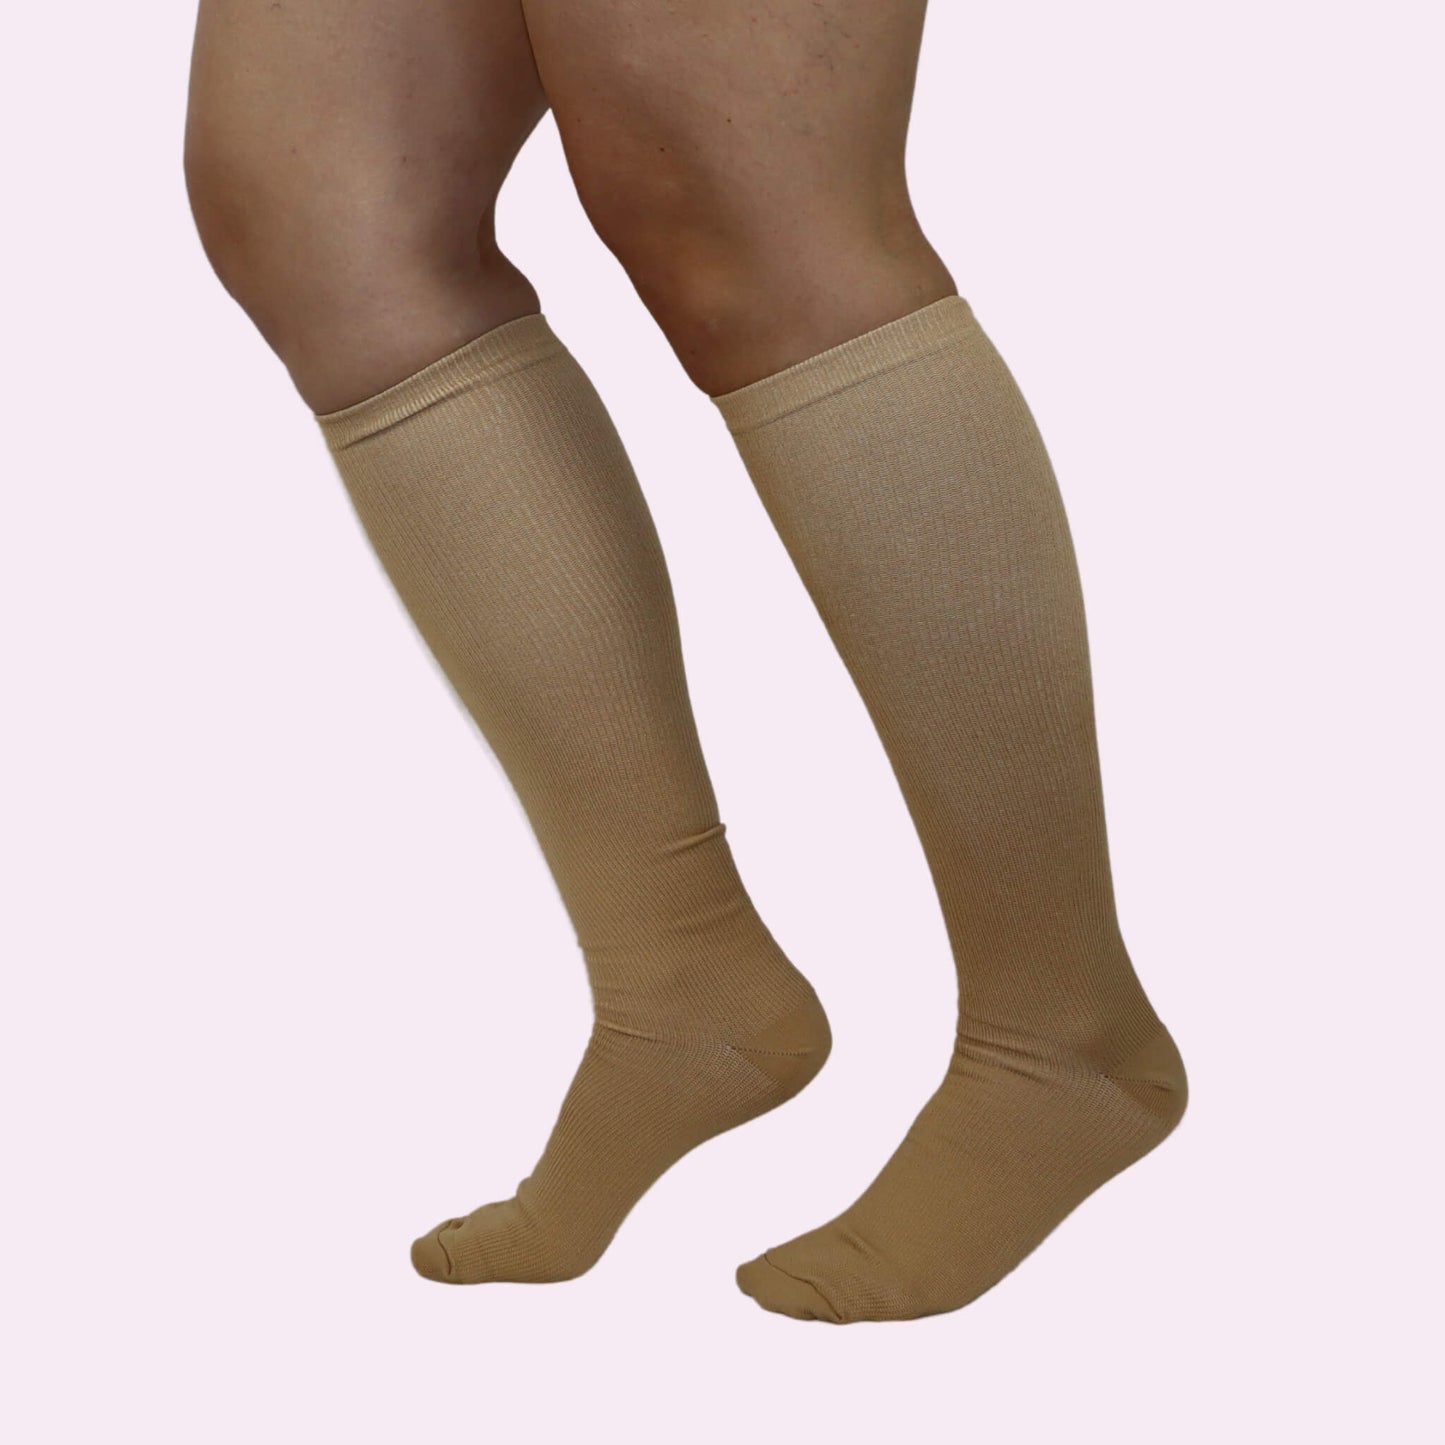 Beige Compression Socks | Knee Length from Fit Right Medical Scrubs